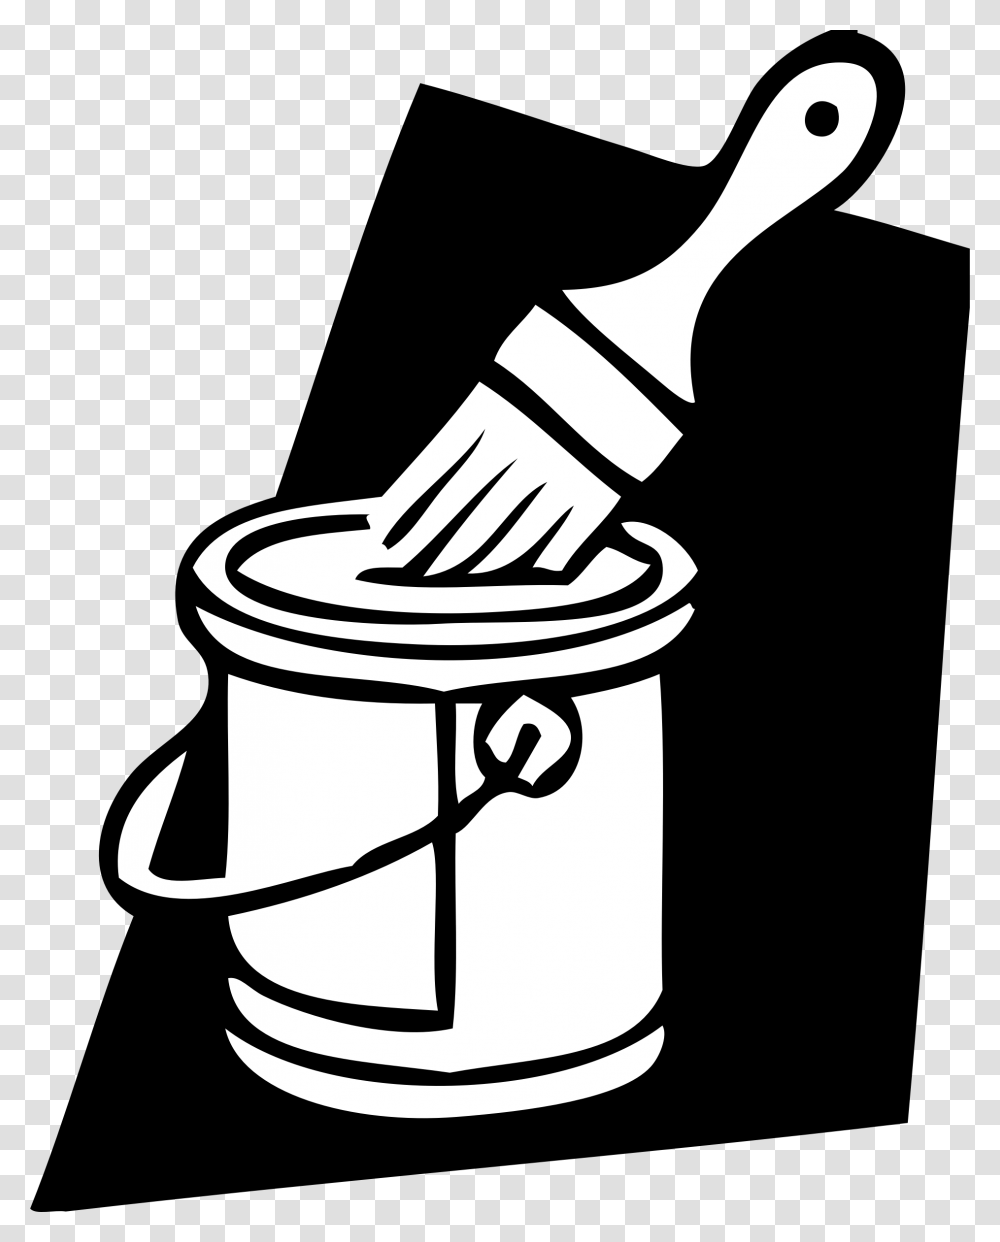 Paint Image Black And White, Bucket, Stencil, Brush, Tool Transparent Png